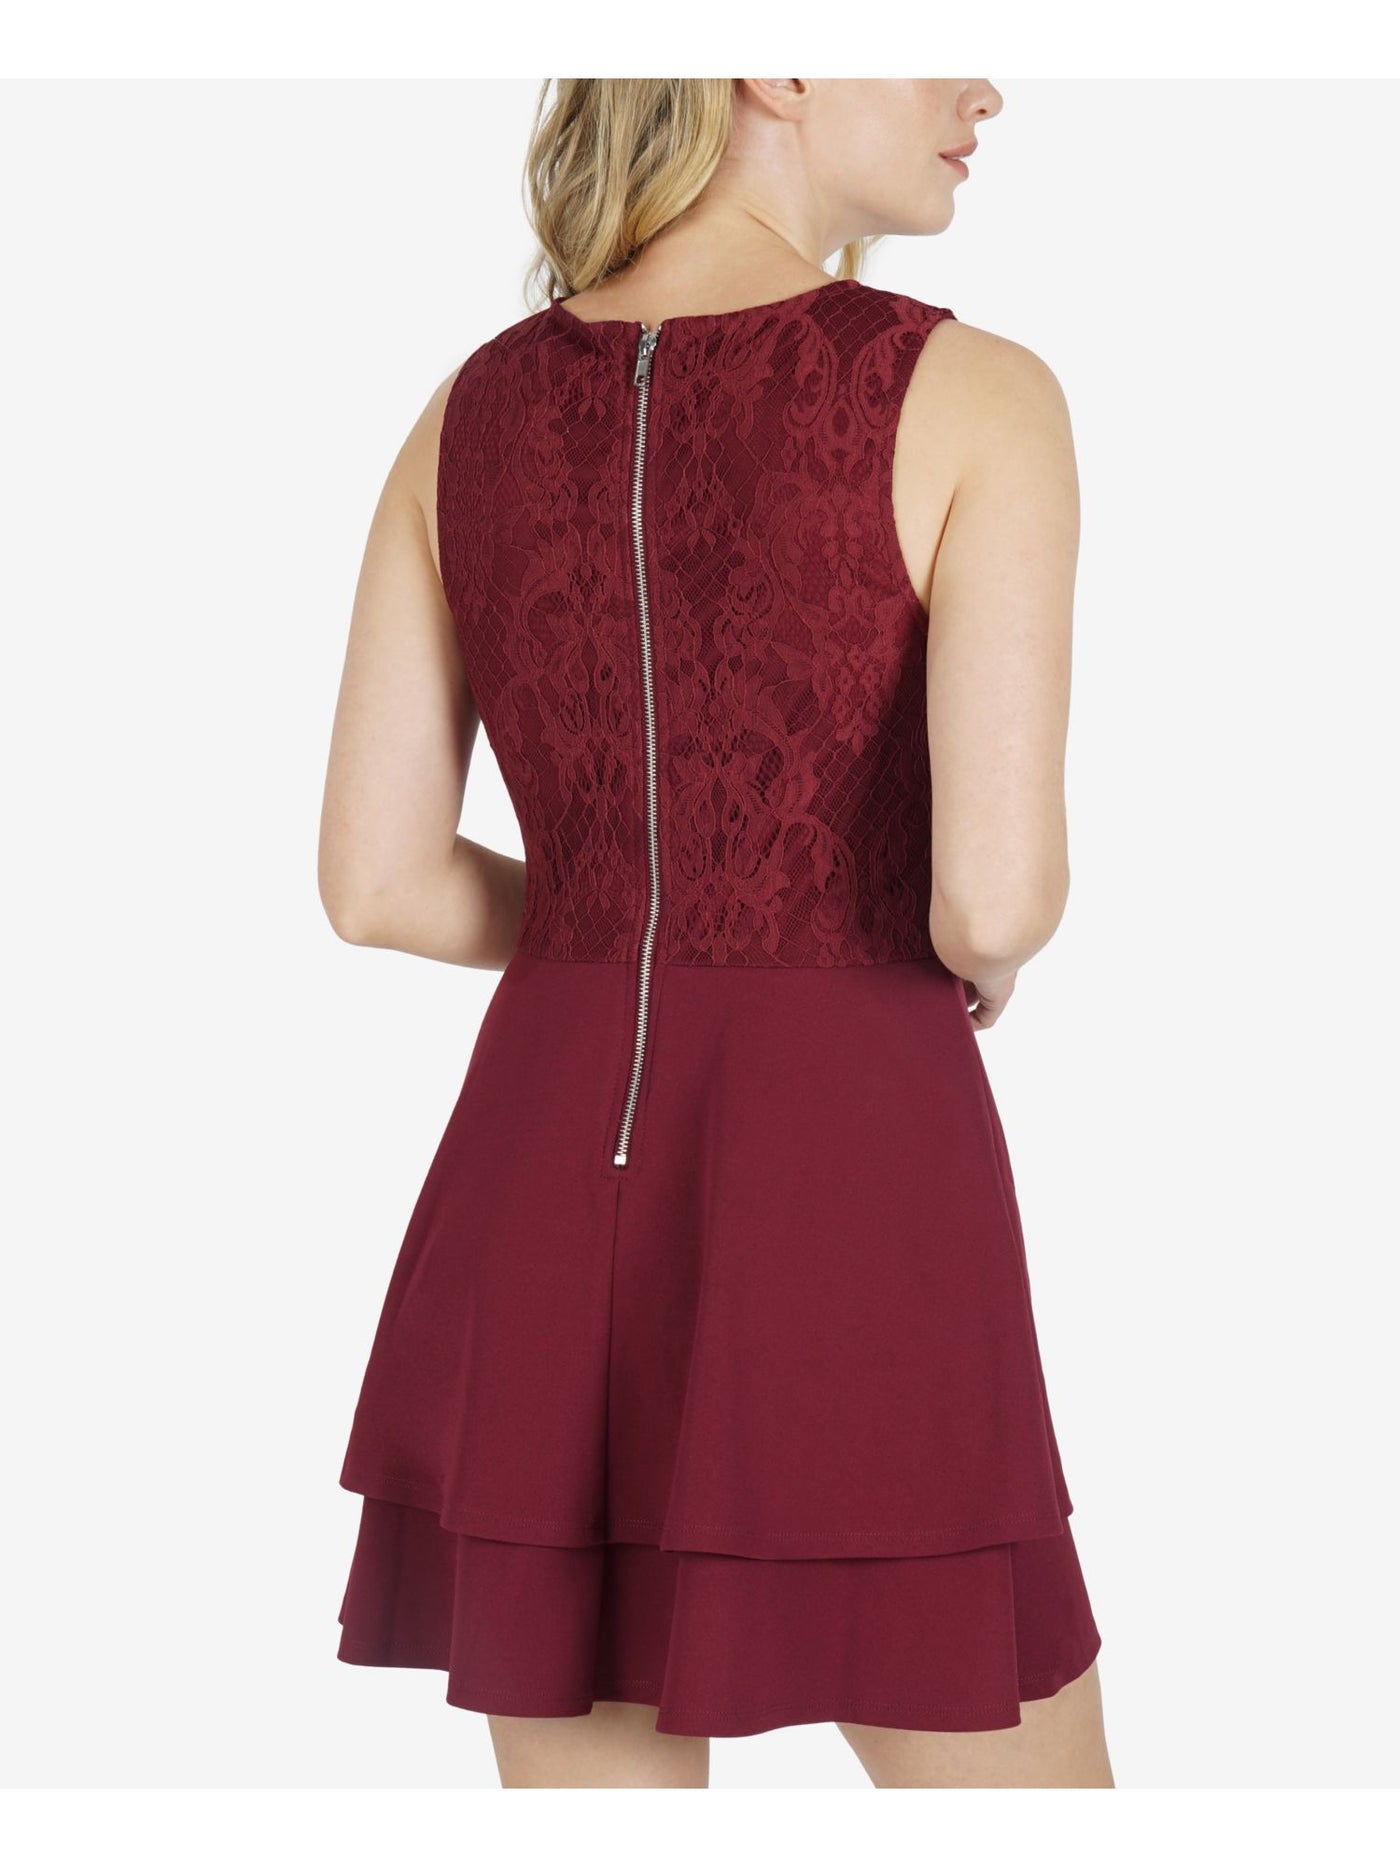 SPEECHLESS Womens Maroon Stretch Pocketed Zippered Lace Top Tiered Flounce Hem Sleeveless Jewel Neck Short Party Fit + Flare Dress Juniors XL